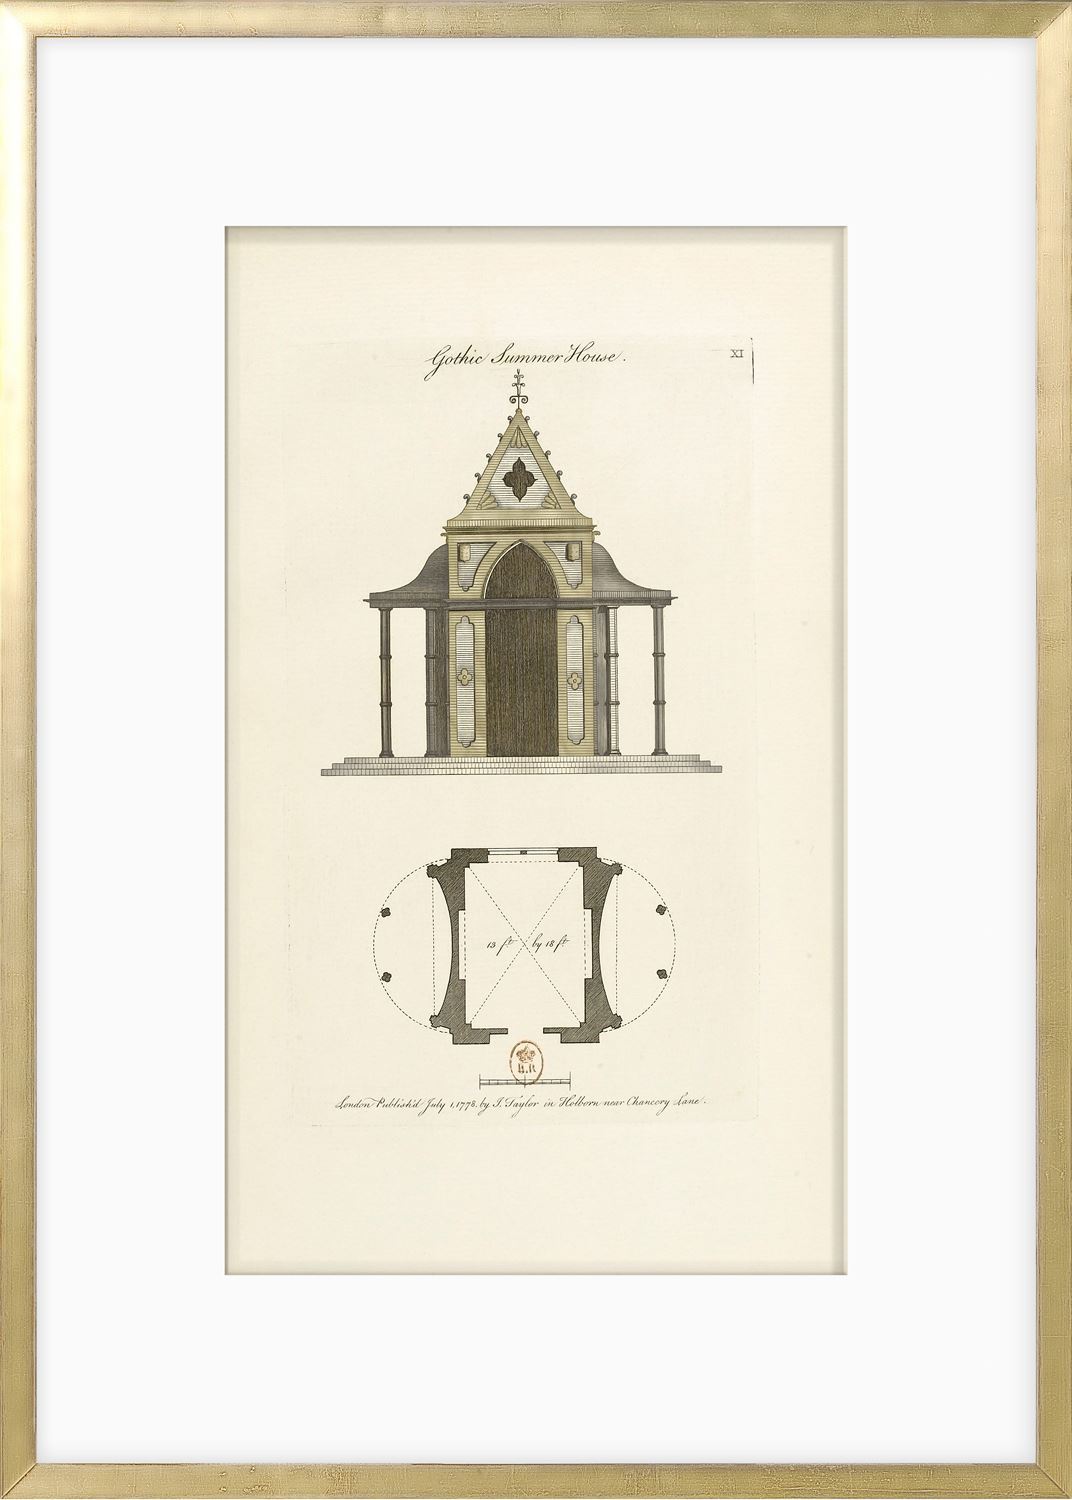 Engraving - Gothic Summer House, 1778